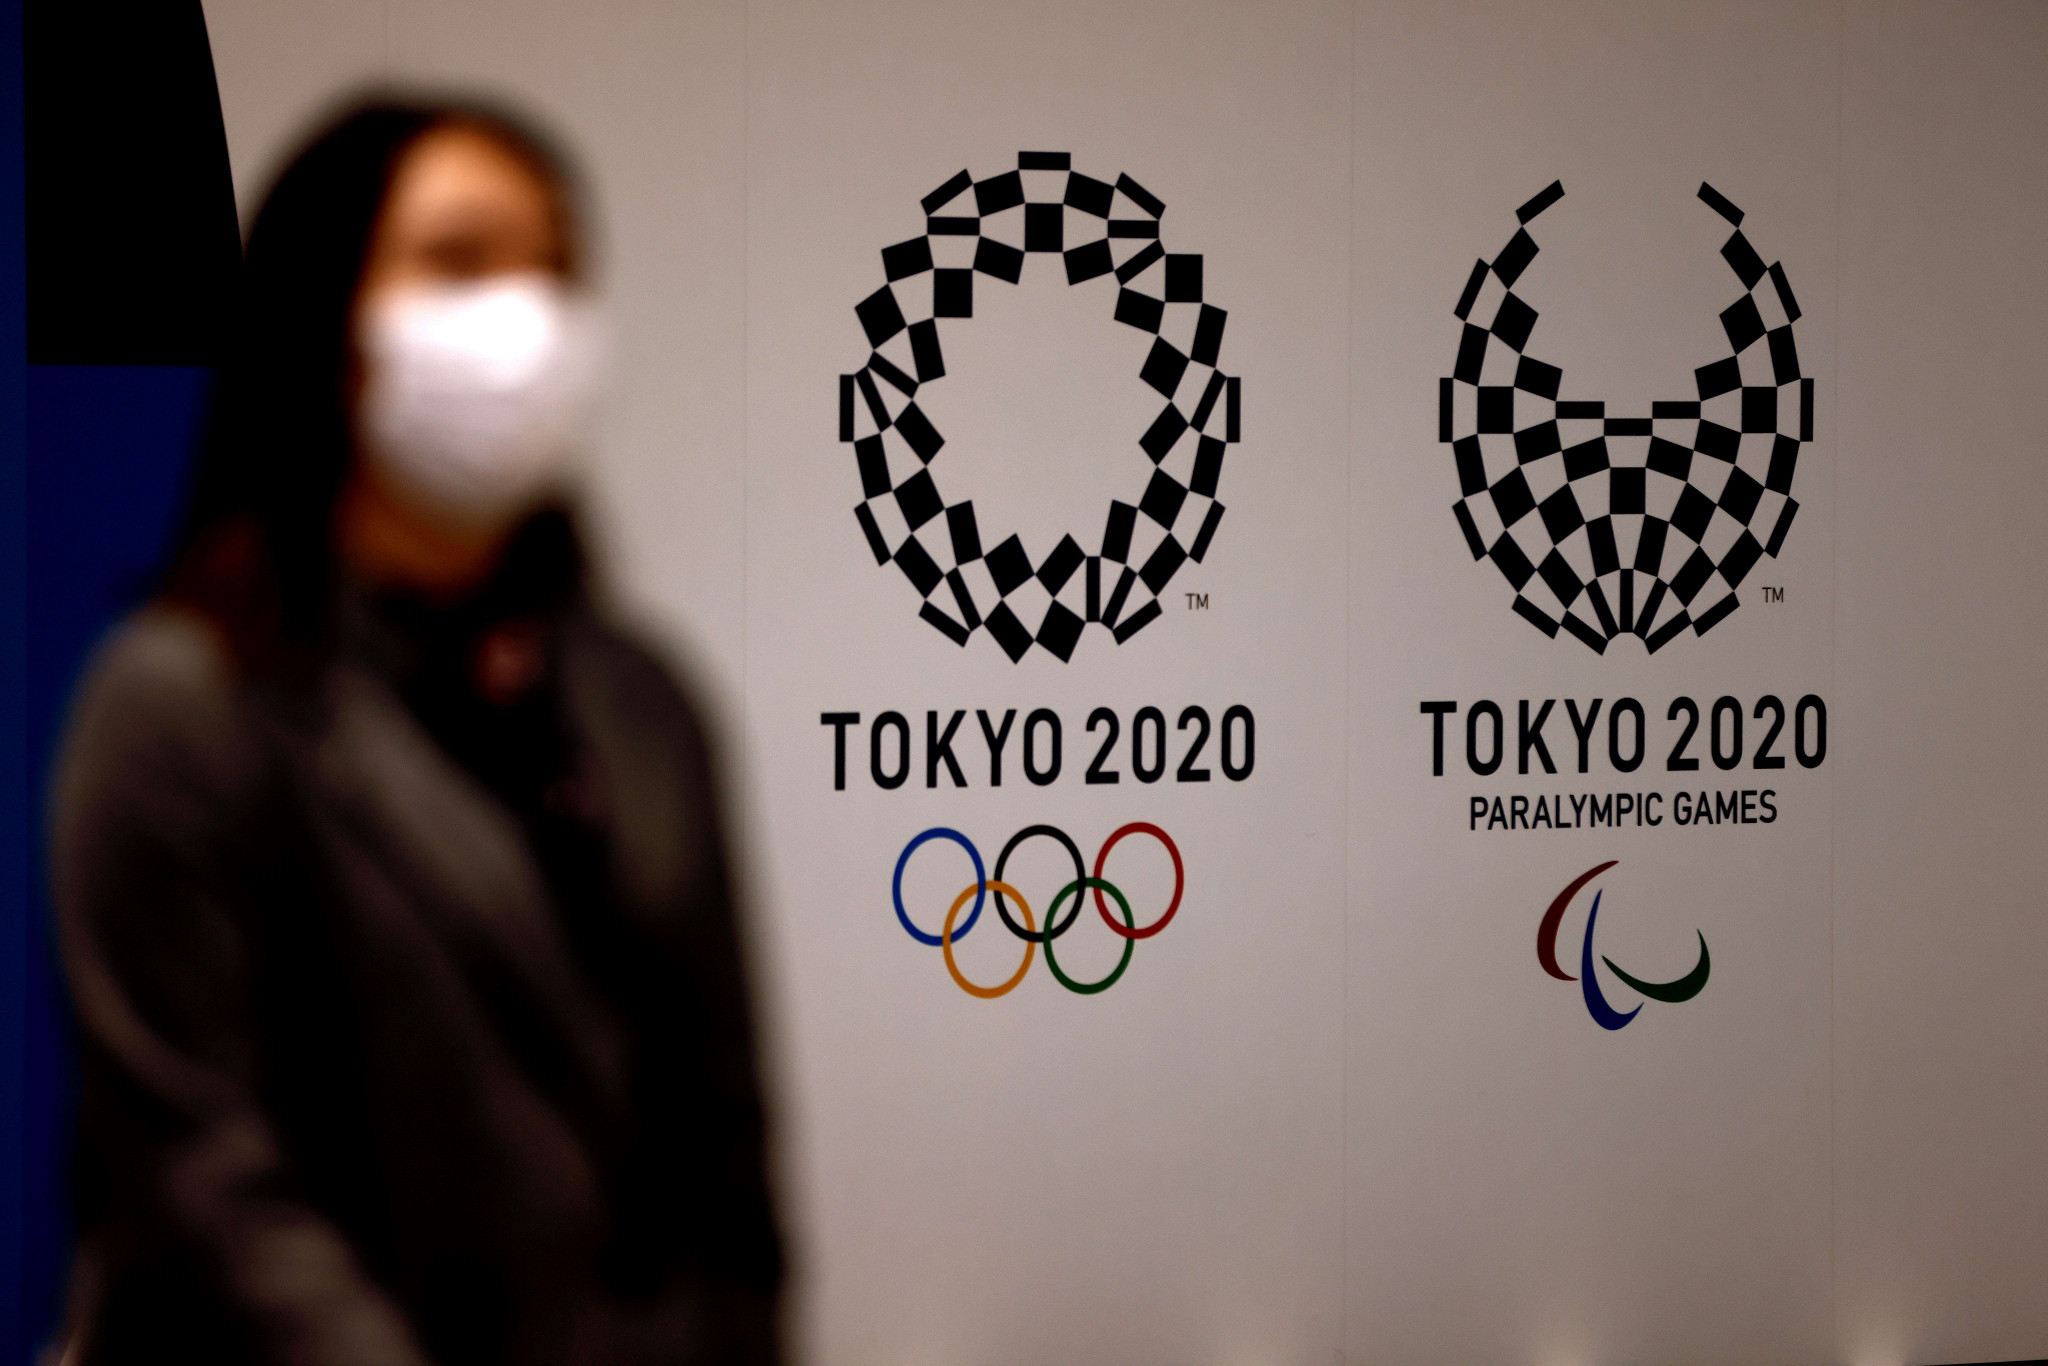 First Tokyo 2020 athlete treated in hospital for COVID-19 since start of Games